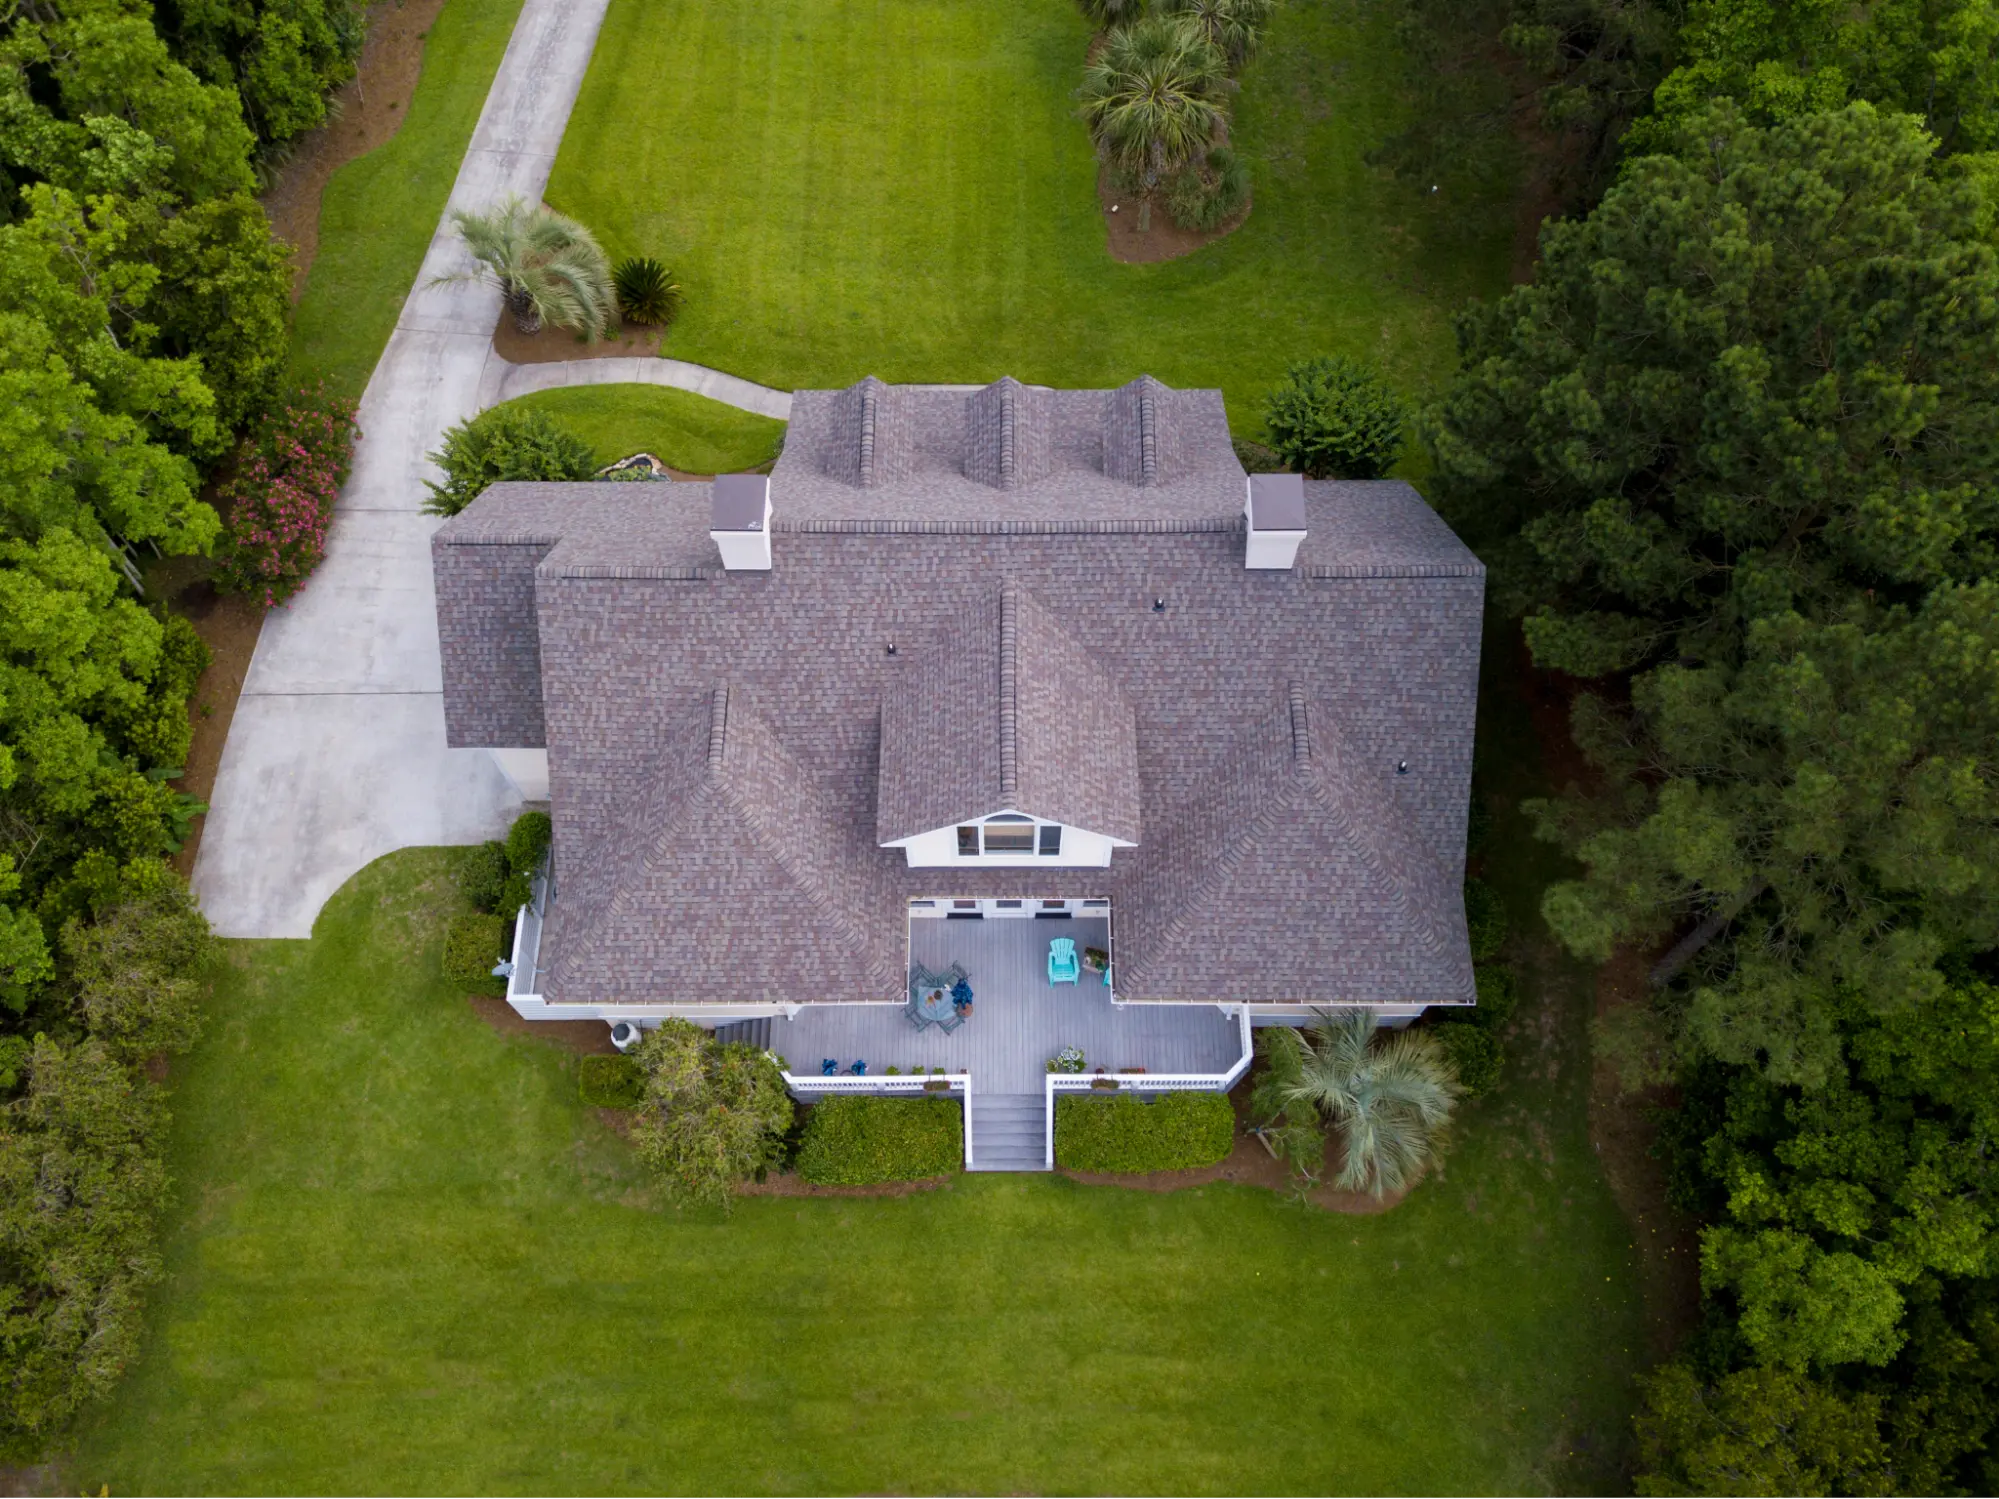 Drone view looking down at large home with shingle roof